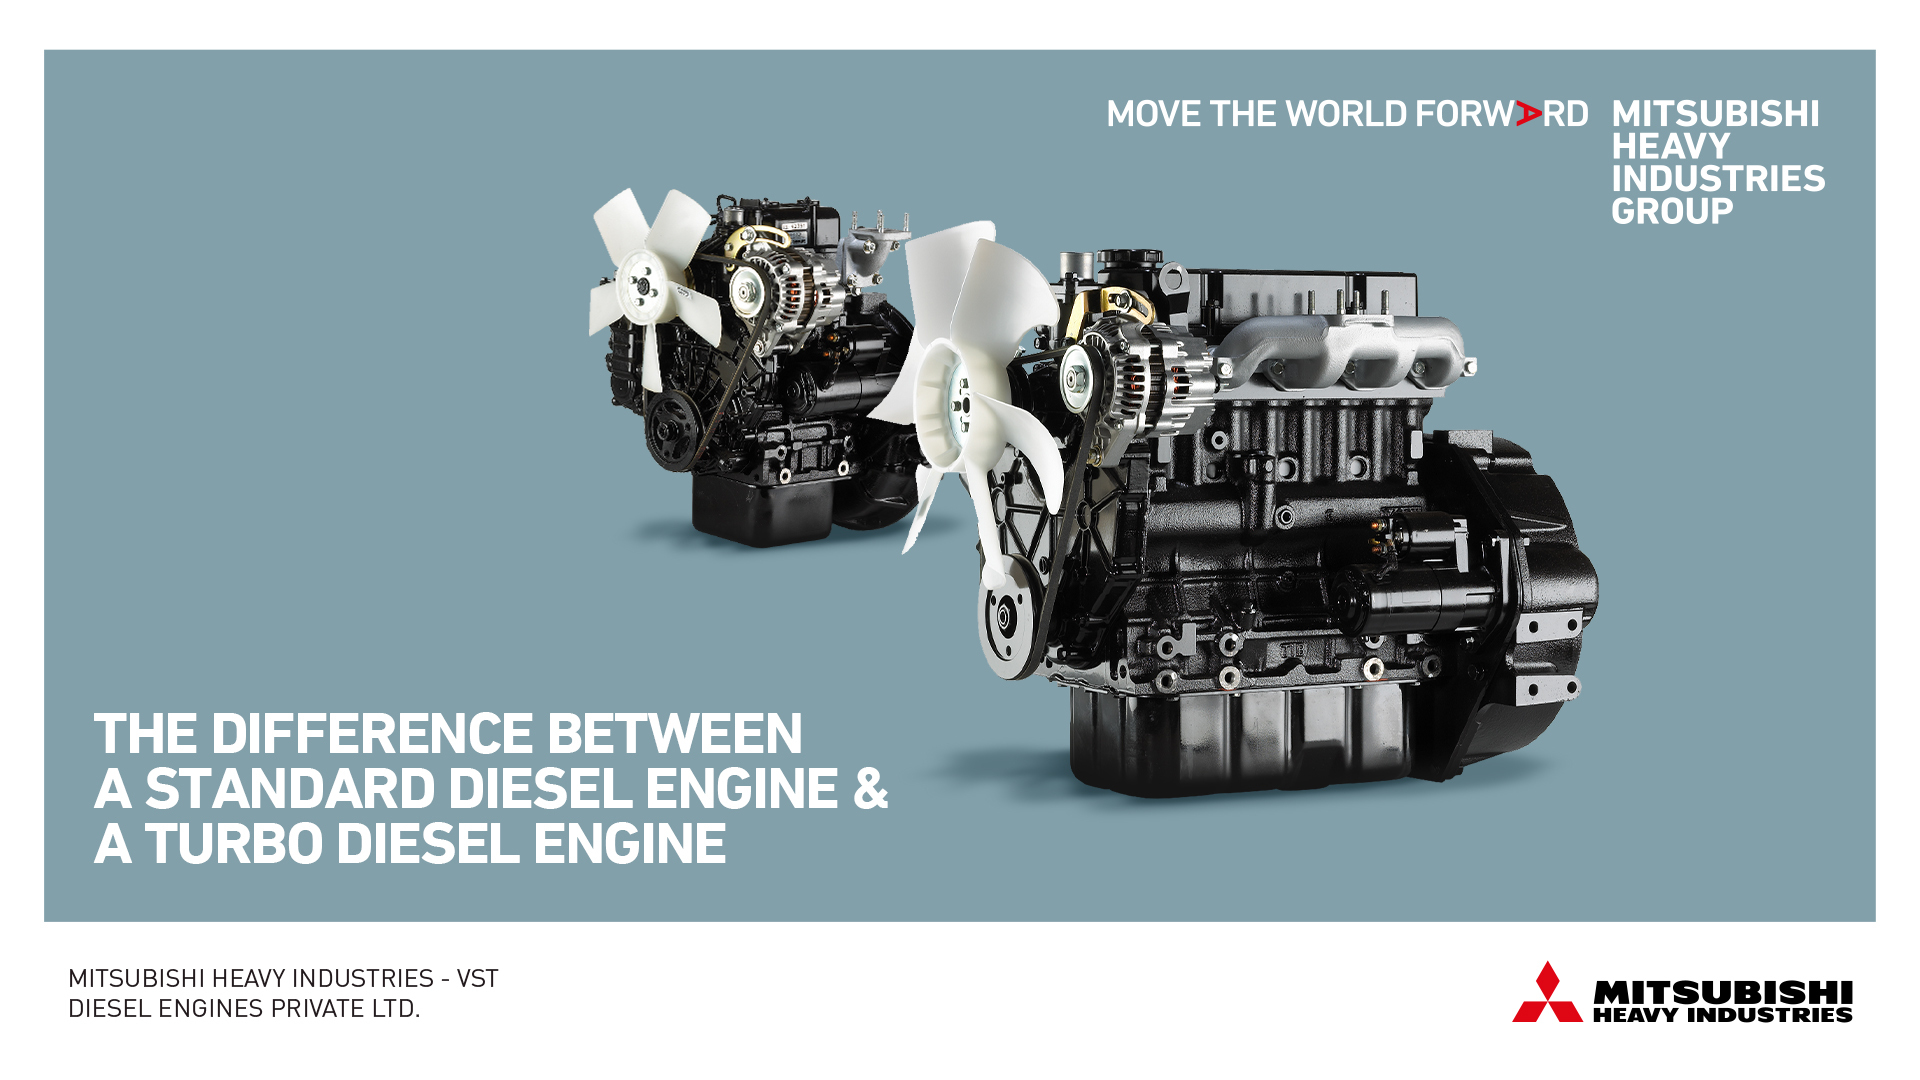 The difference between a standard diesel engine & a turbo diesel engine